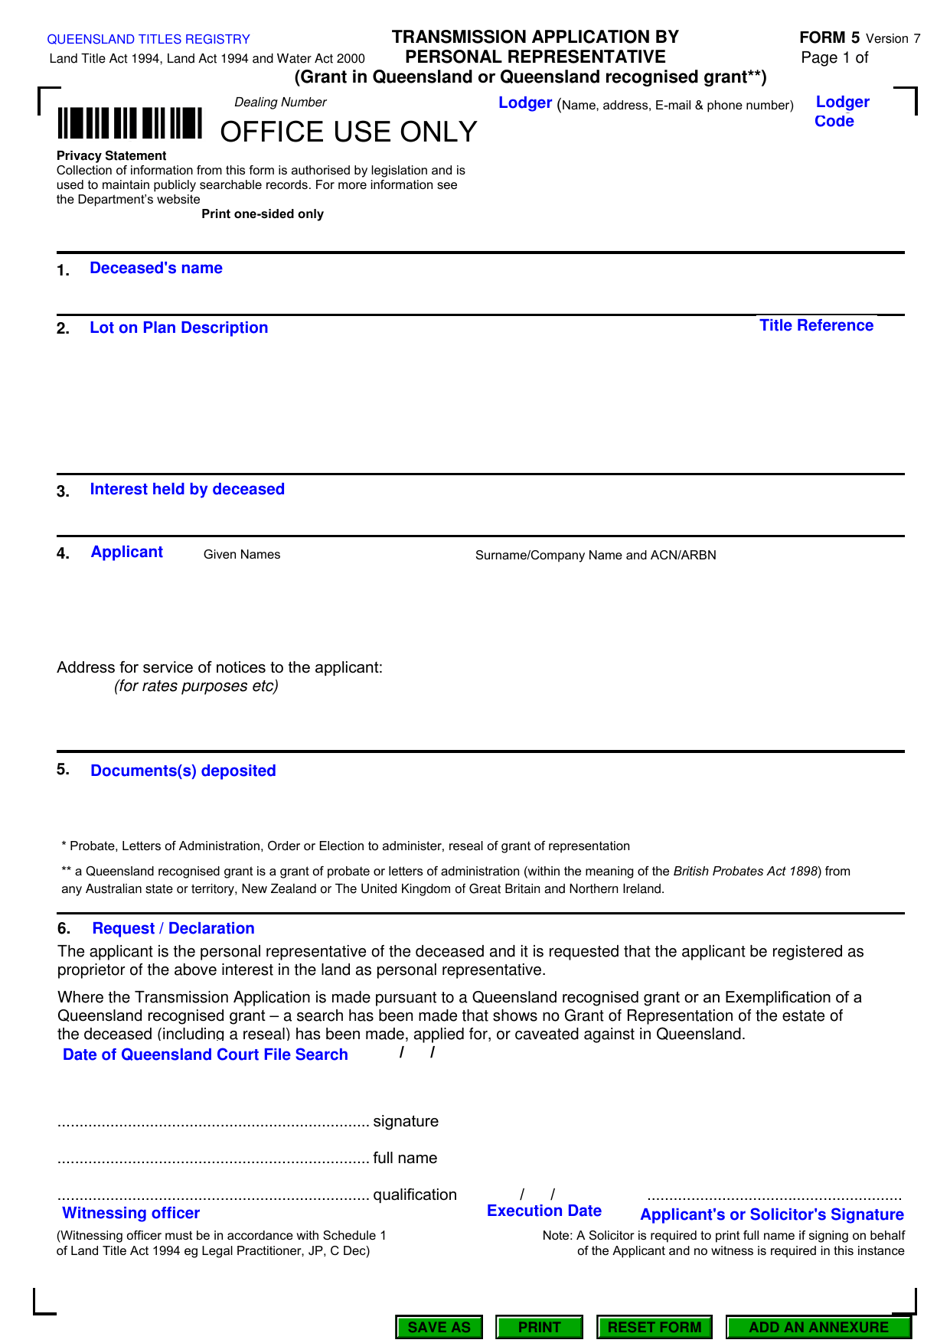 Form 5 Transmission Application by Personal Representative (Grant in Queensland or Queensland Recognised Grant) - Queensland, Australia, Page 1